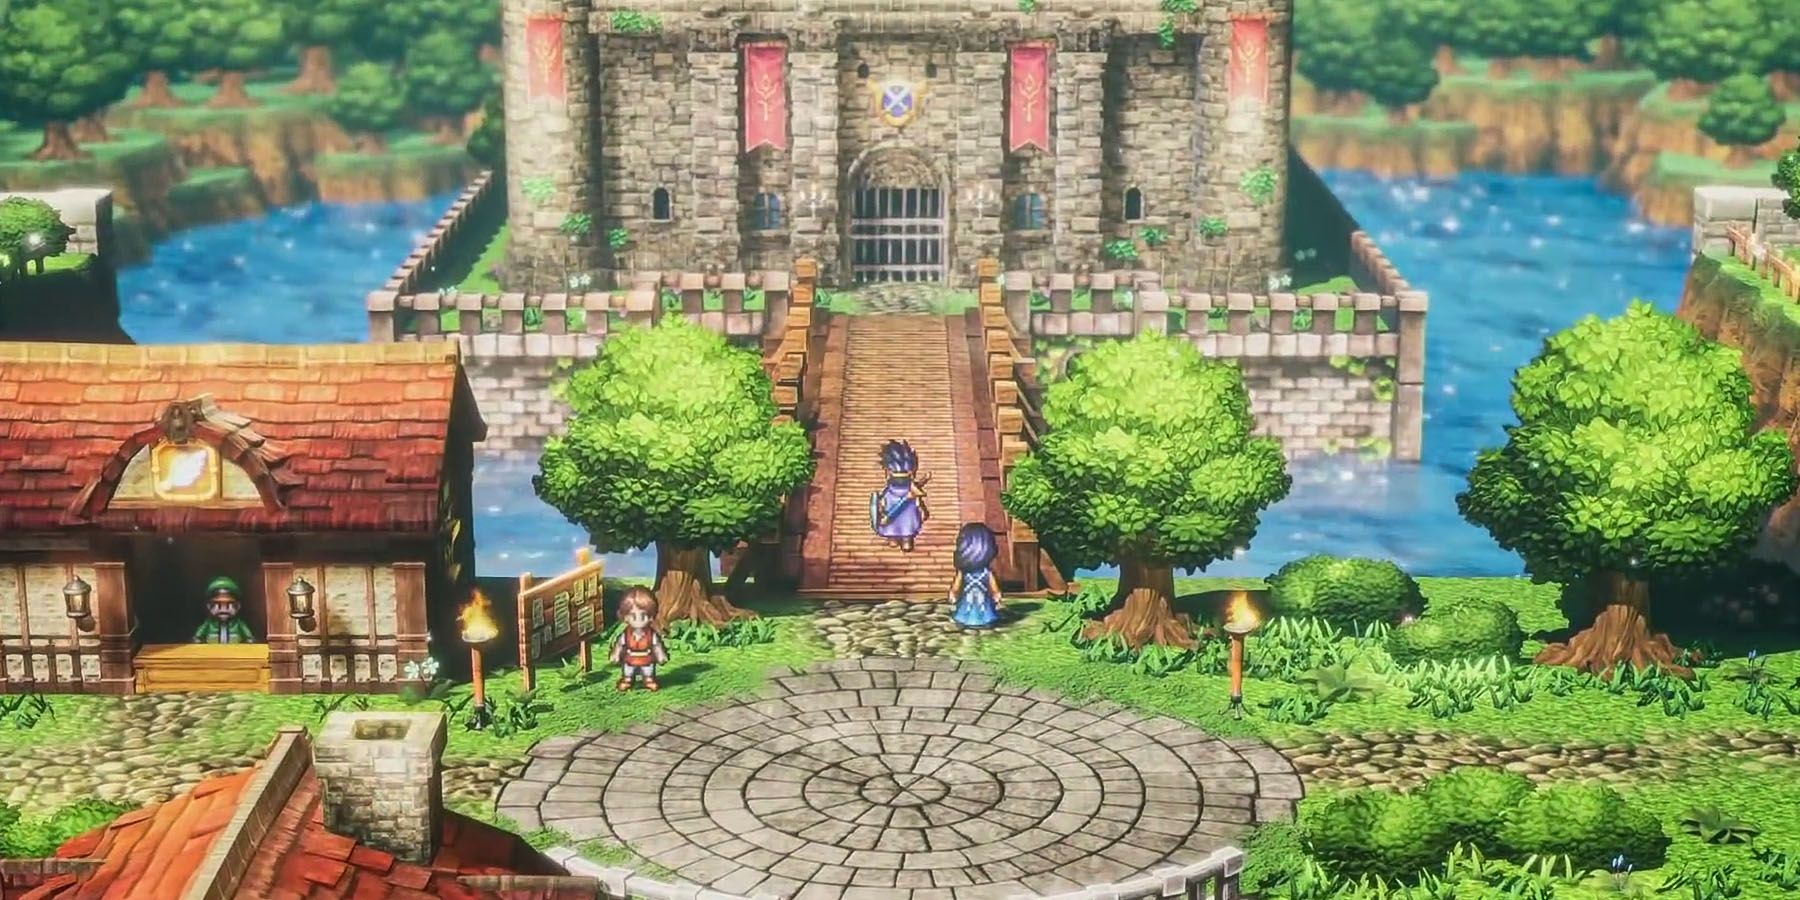 dragon-quest-3-s-hd-2d-remake-is-just-as-exciting-as-final-fantasy-7-s